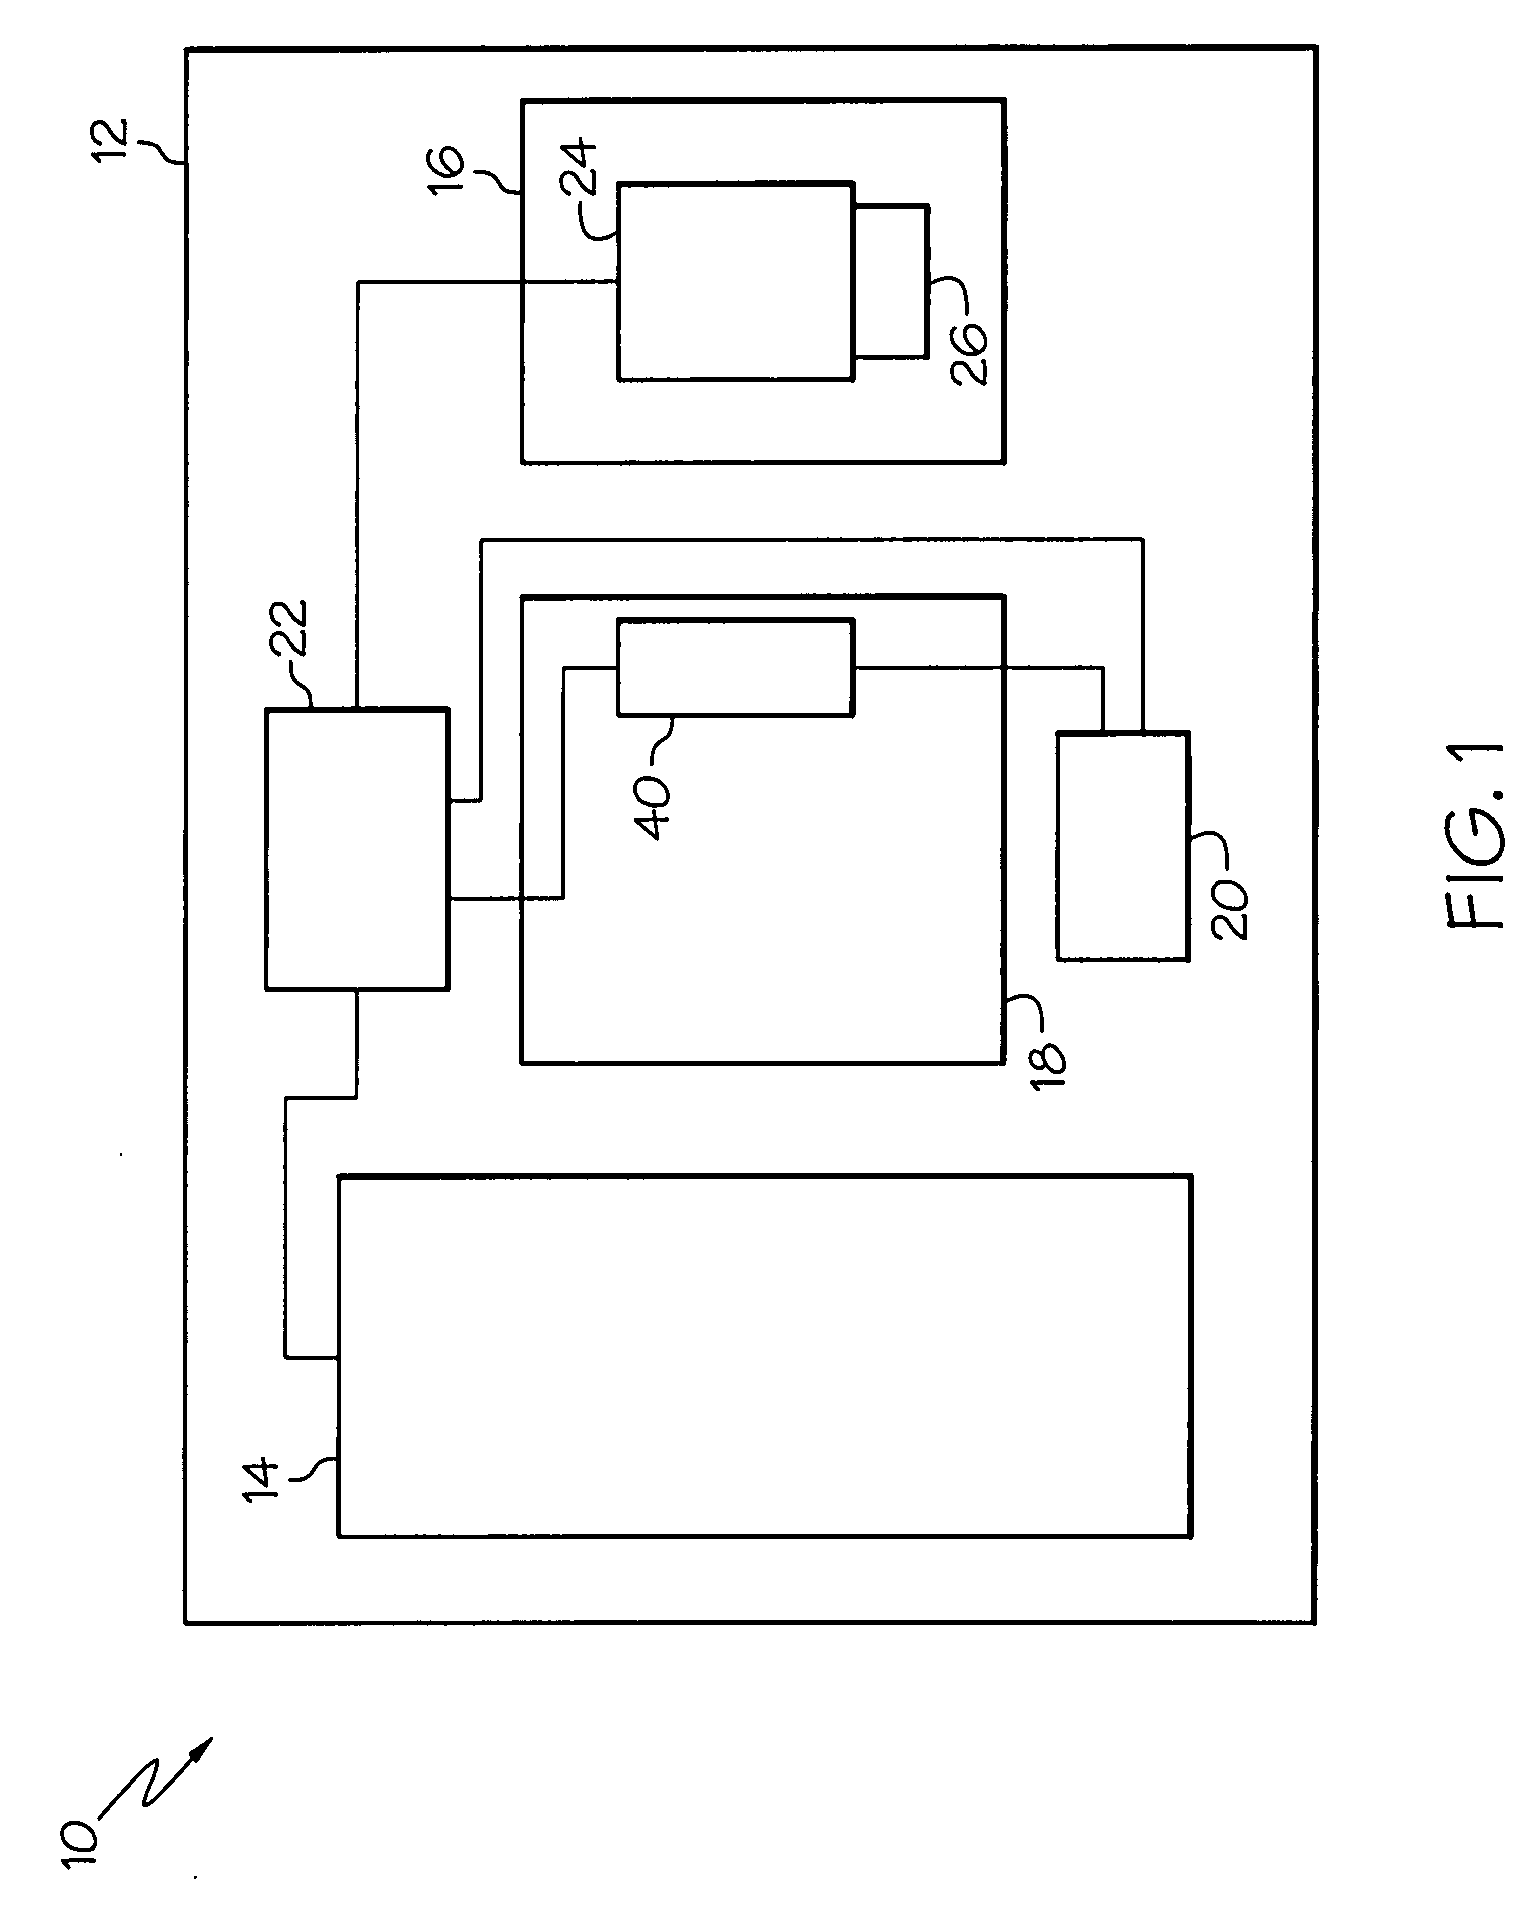 Apparatus and method for monitoring the stability of a construction machine